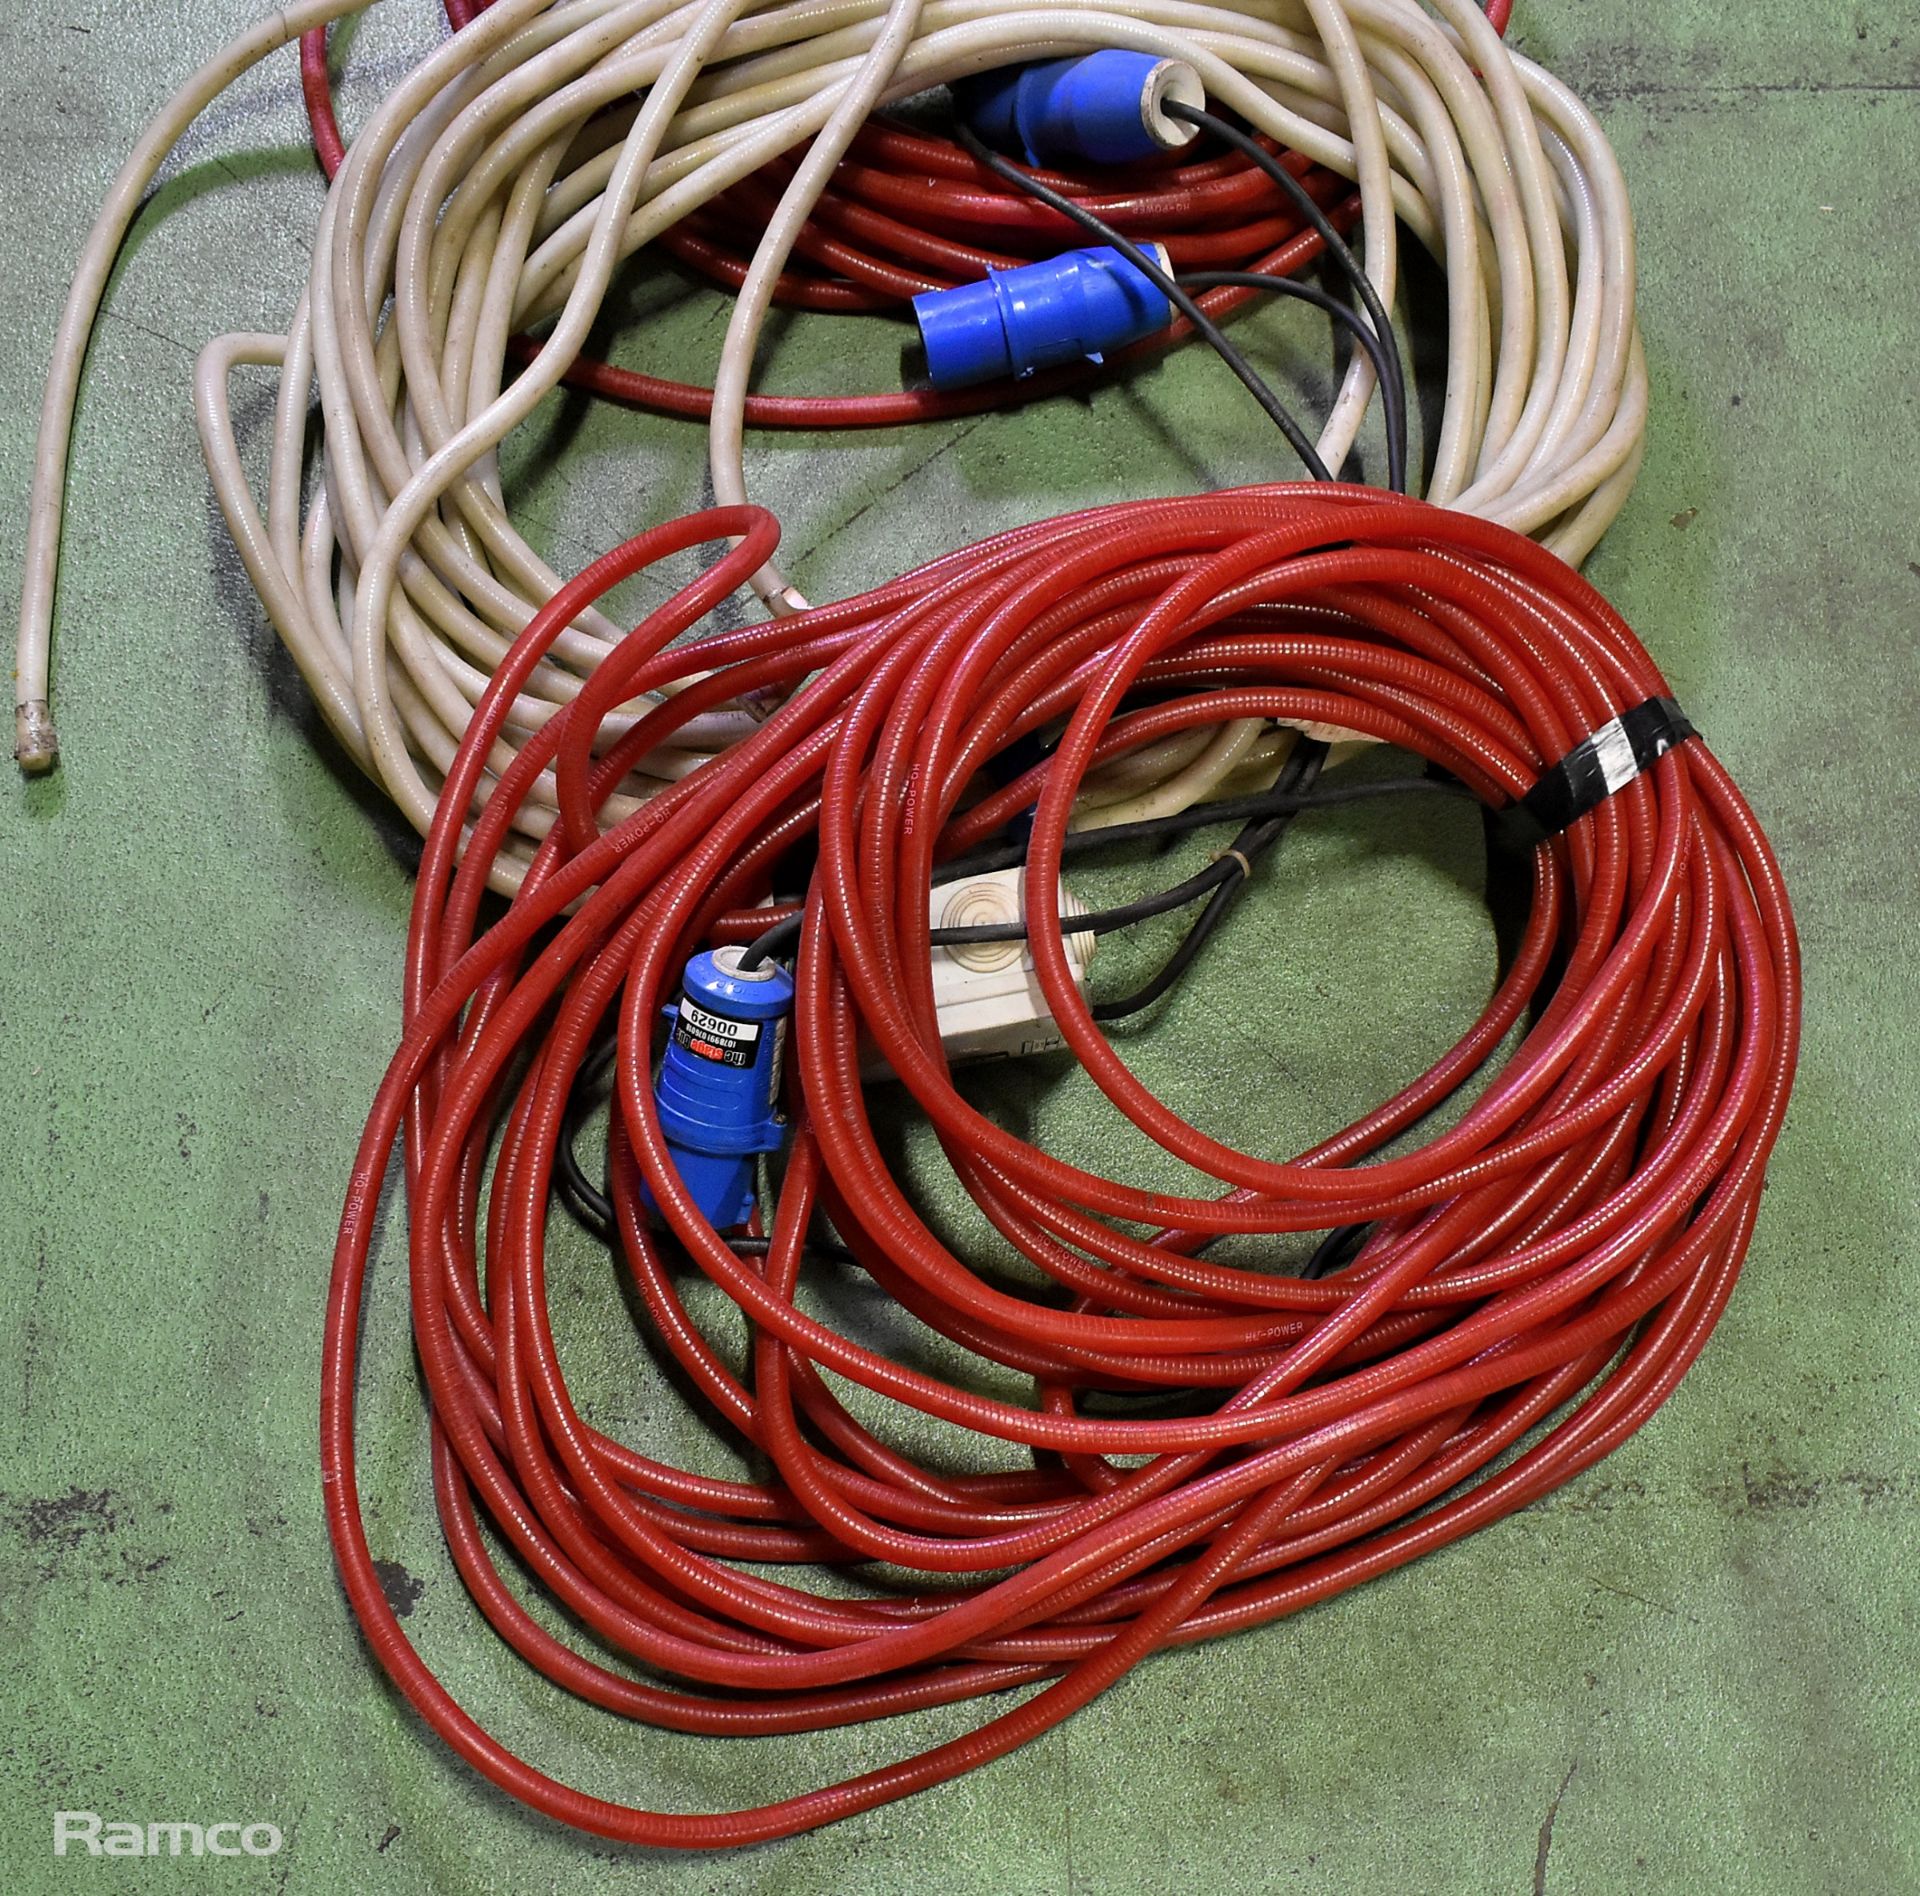 Professional 230V rope light with assorted colours, Red & white - unknown length - Image 4 of 4